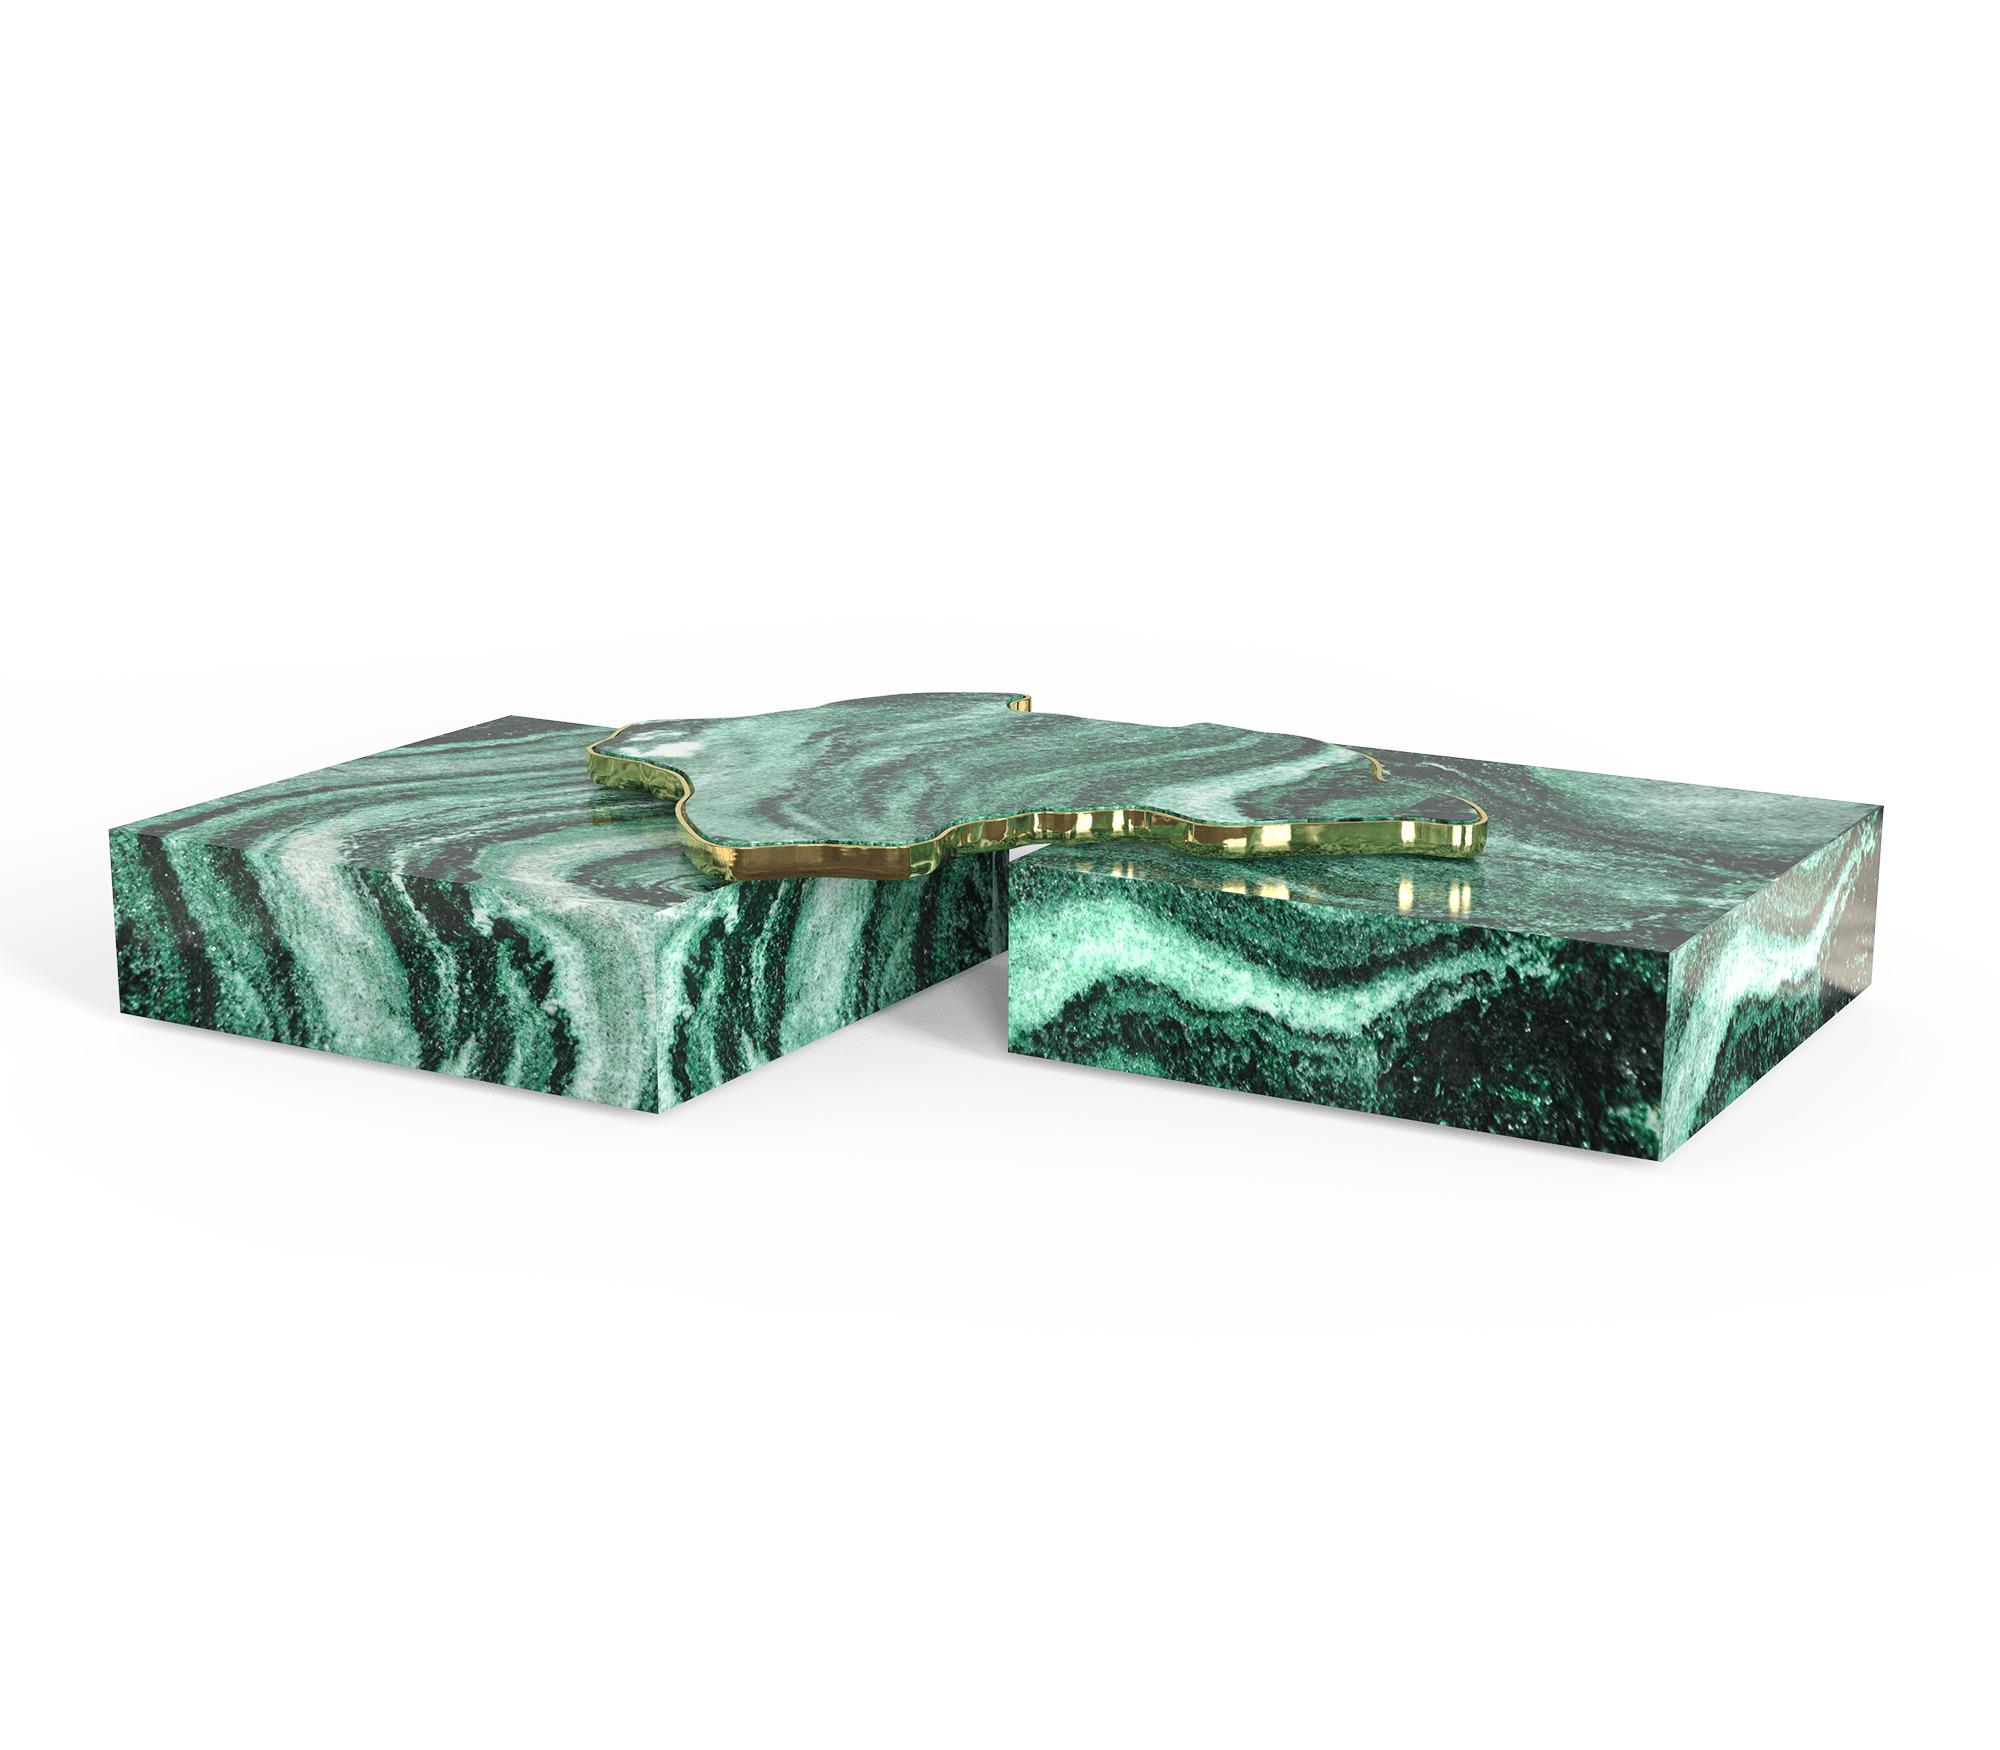 Centre table in green marble.

A contemporary center table composed by two square marble modules, linked by an organic marble surface element on top enveloped by casted brass.

Dimensions: H: 35 cm, l: 206 cm, d: 136 cm

Time of production 12